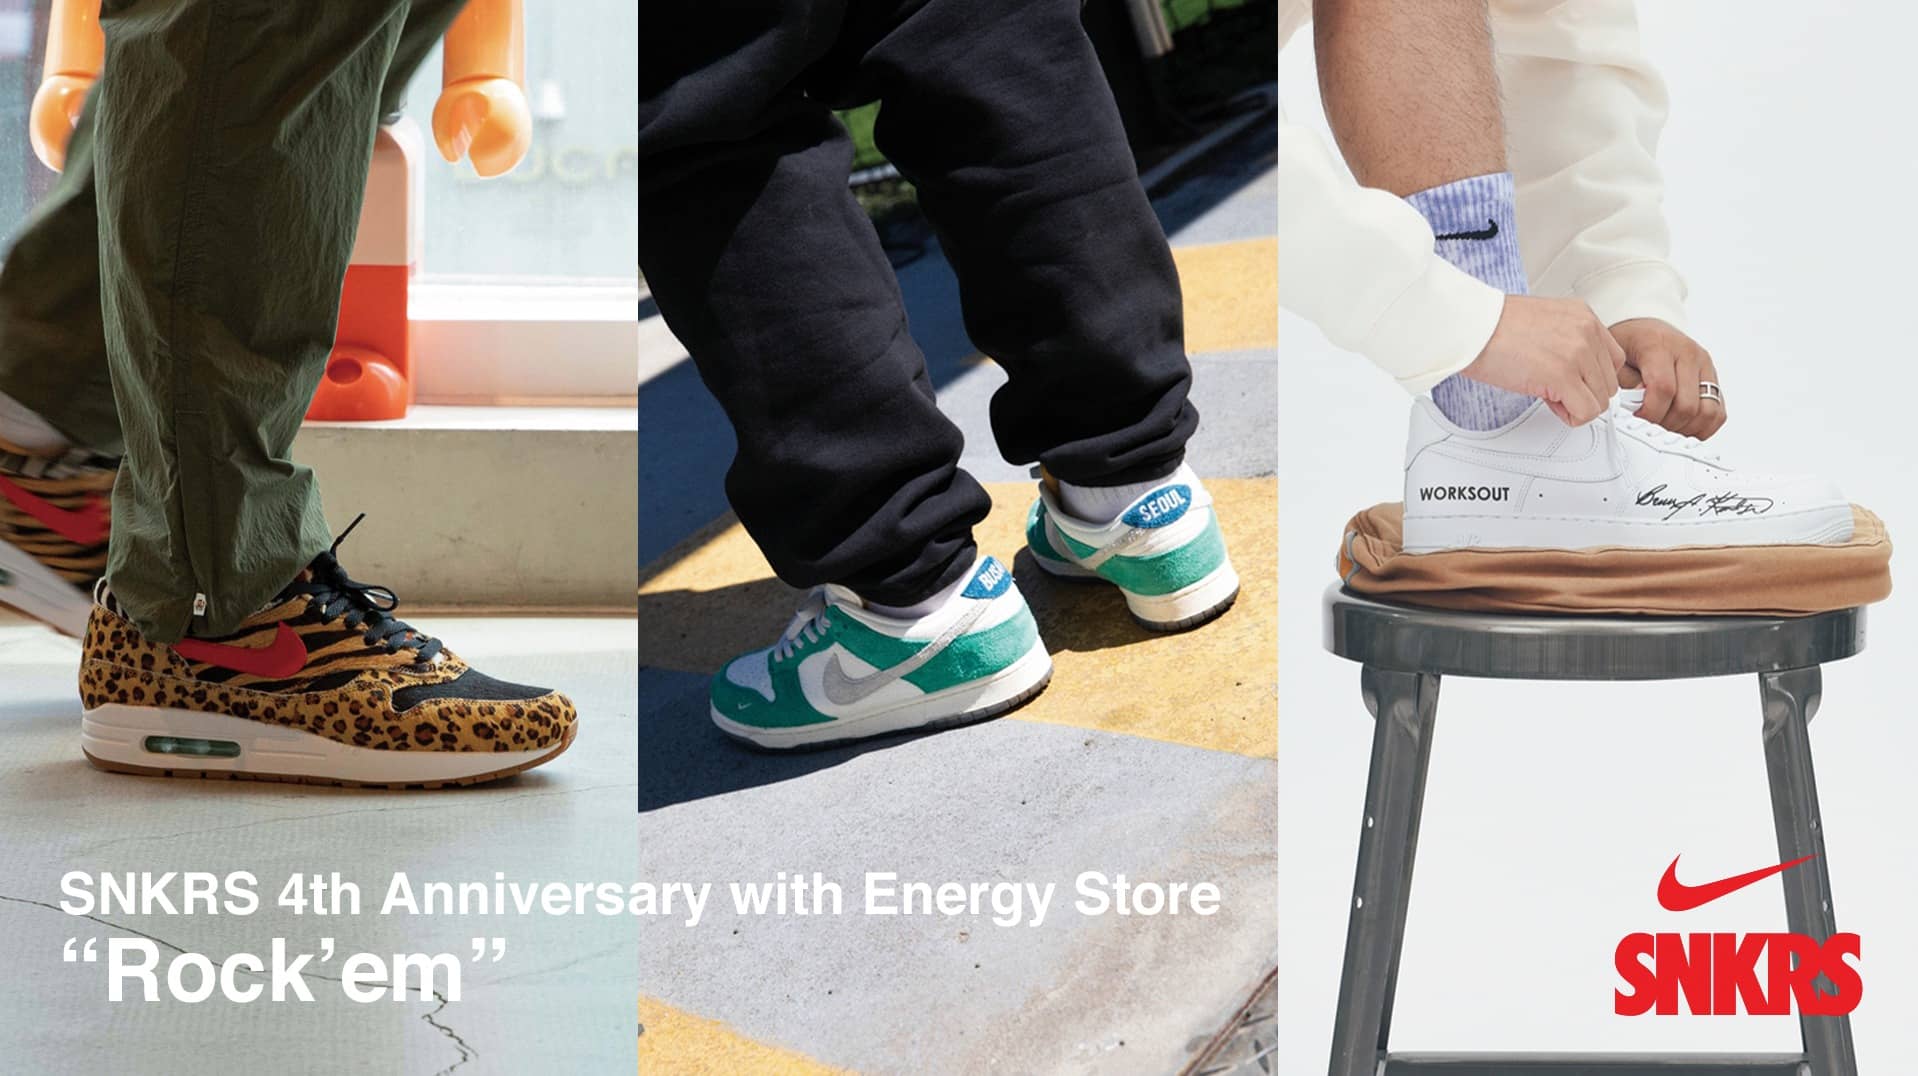 SNKRS 4th Anniversary with Energy Store “Rock’em”